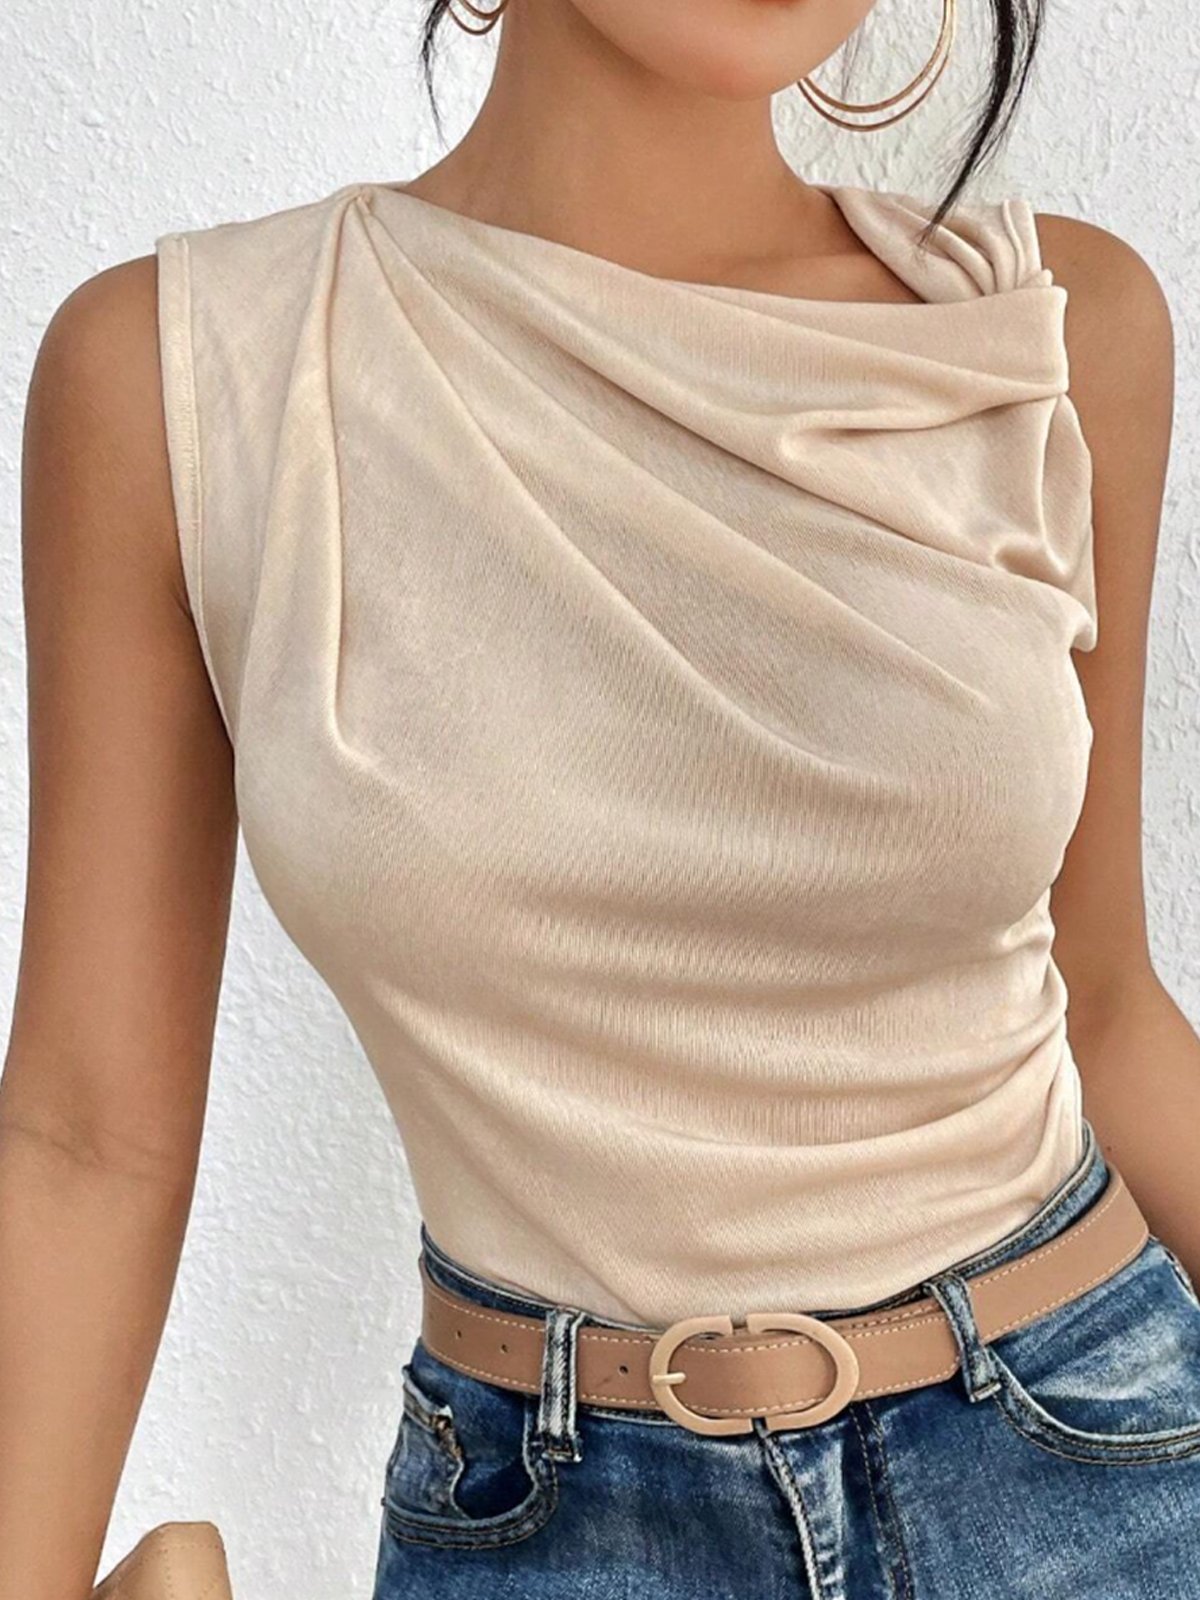 Daily Plain Sleeveless Ruched Tank Top